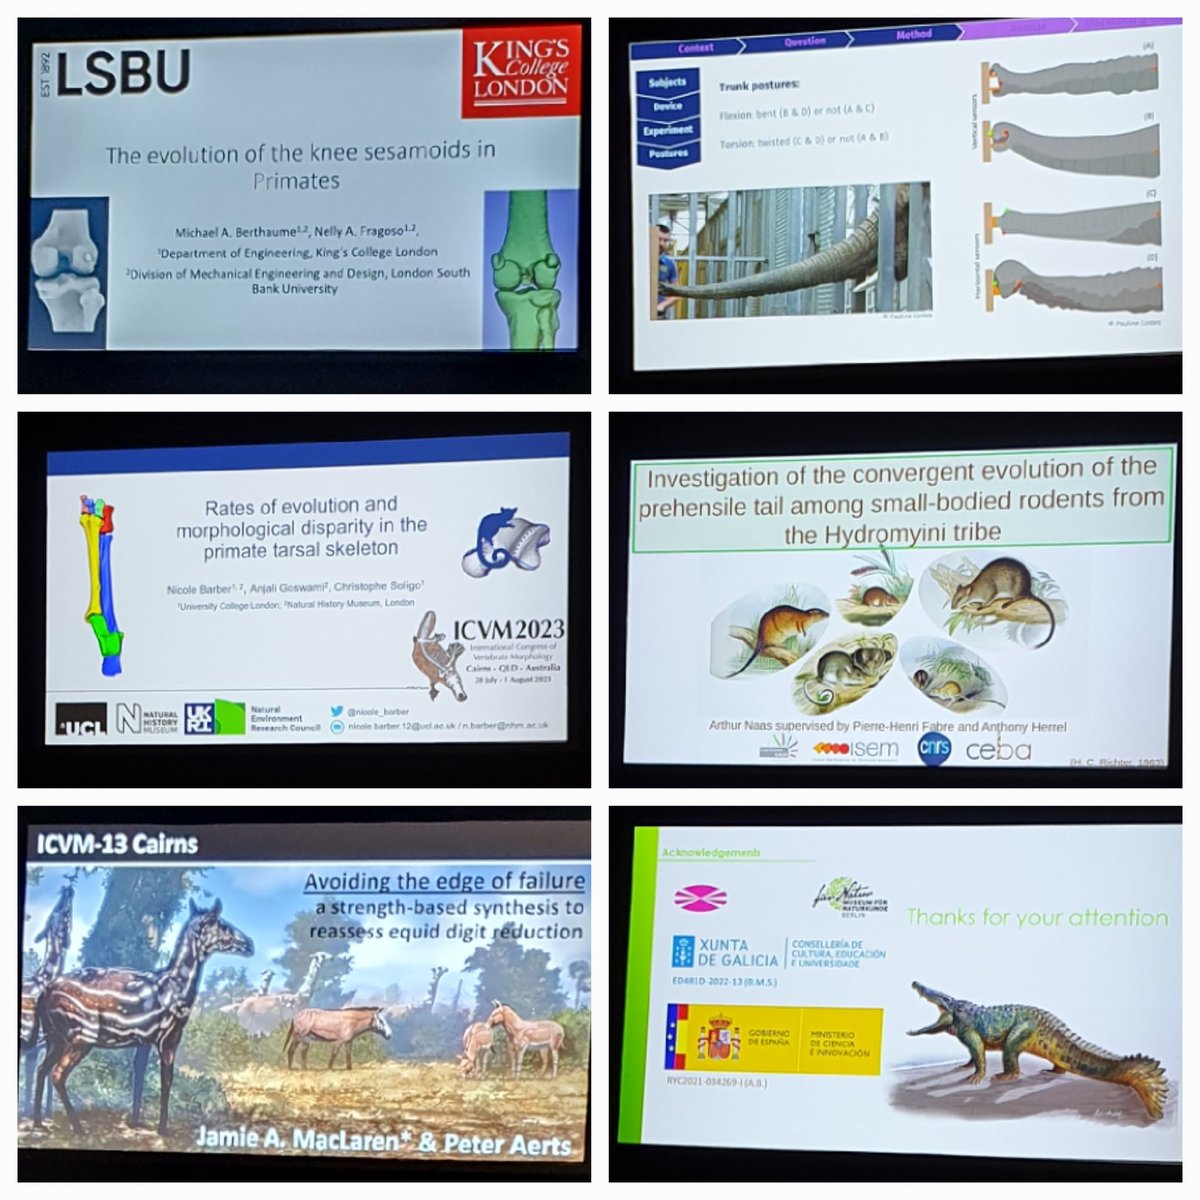 Great early morning session on limbs and 'limbs' at #ICVM2023 Day 4 with @MBerthaume 🦵 Pauline Costes 🐘 @nicole_barber 🐒 Arthur Nass 🐀 @palaeotheoryum 🐎 Alejandro Blanco🐊